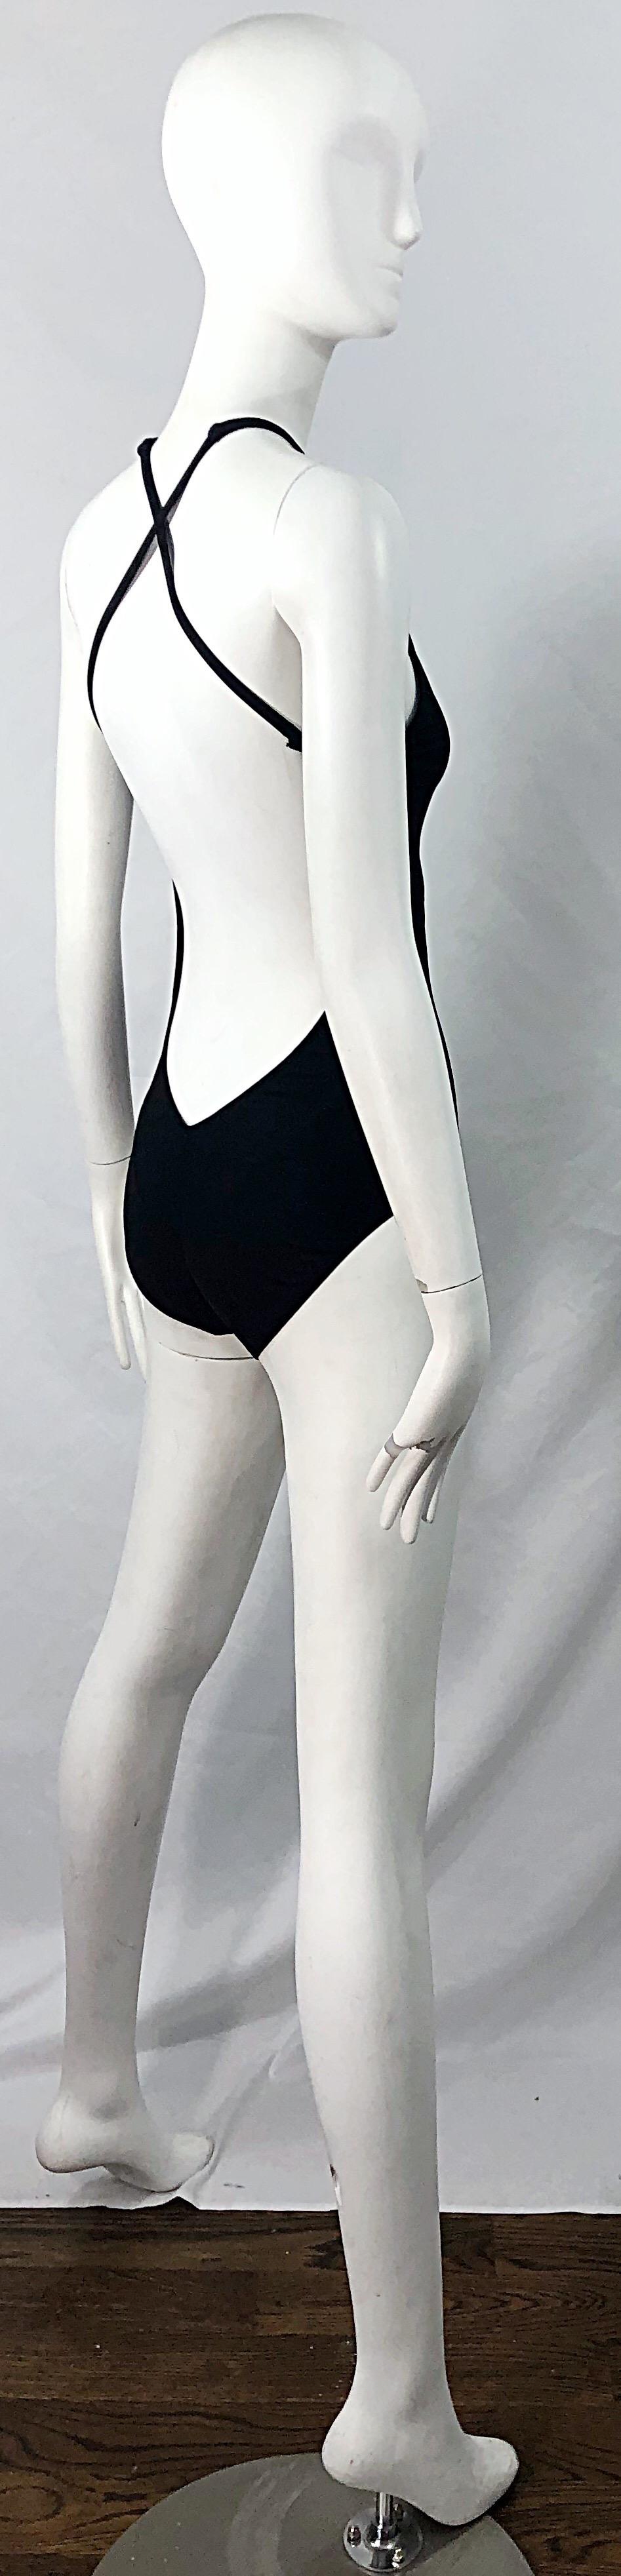 NWT Bob Mackie Late 1970s Black Sexy Cut Out One Piece Vintage Swimsuit Bodysuit 1